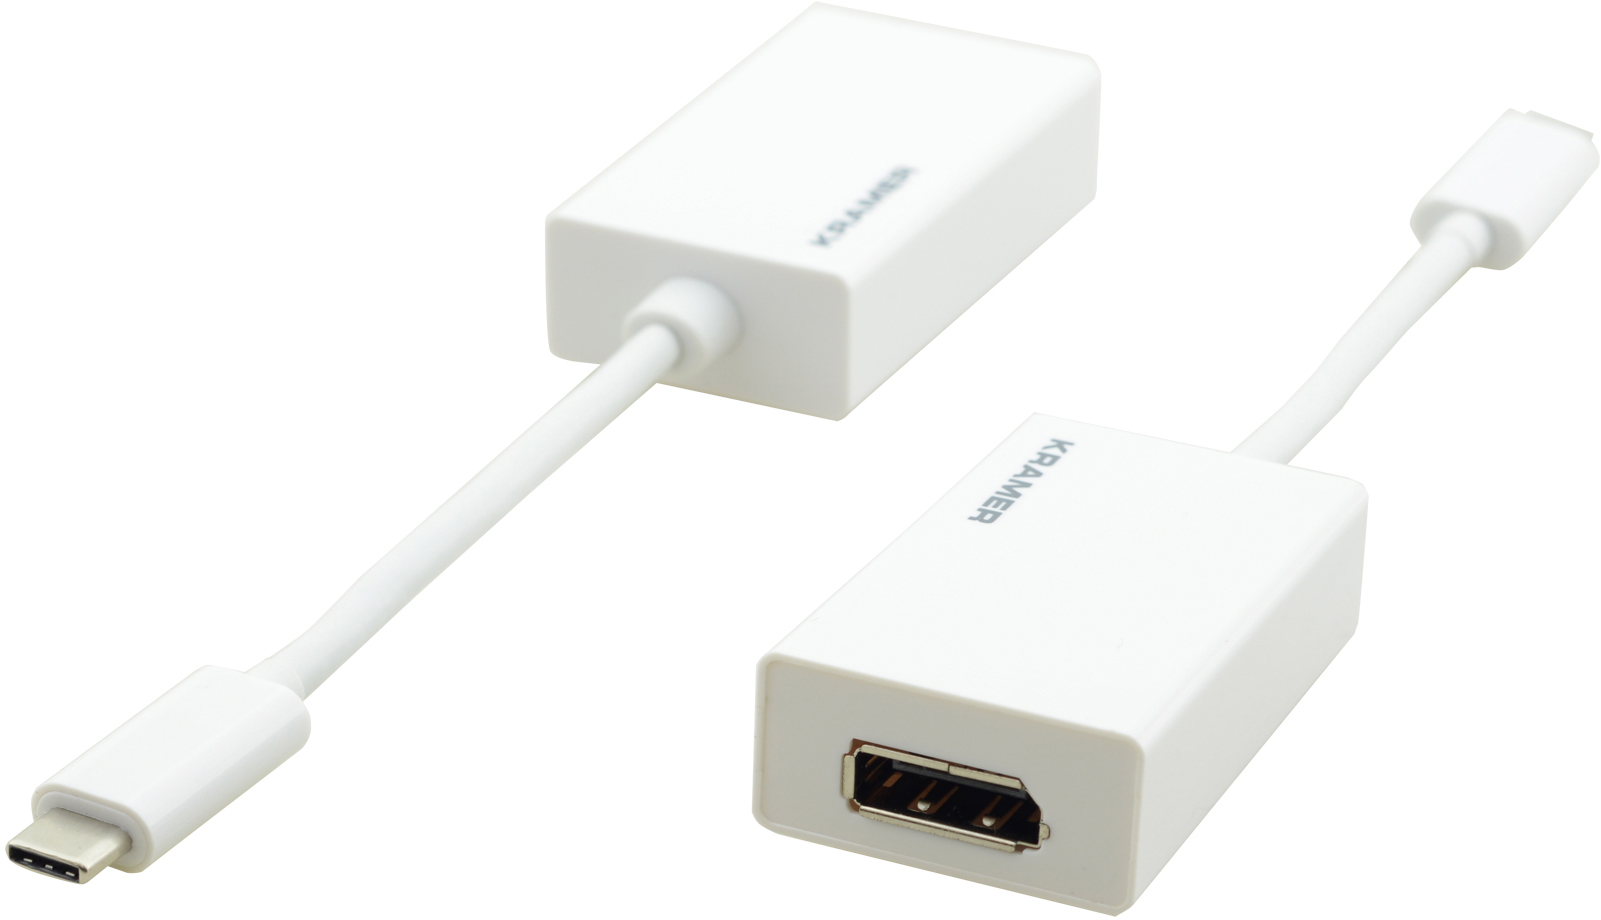 Kramer ADC-U31C/DPF USB 3.1 Type-C to DP Adapter Cable